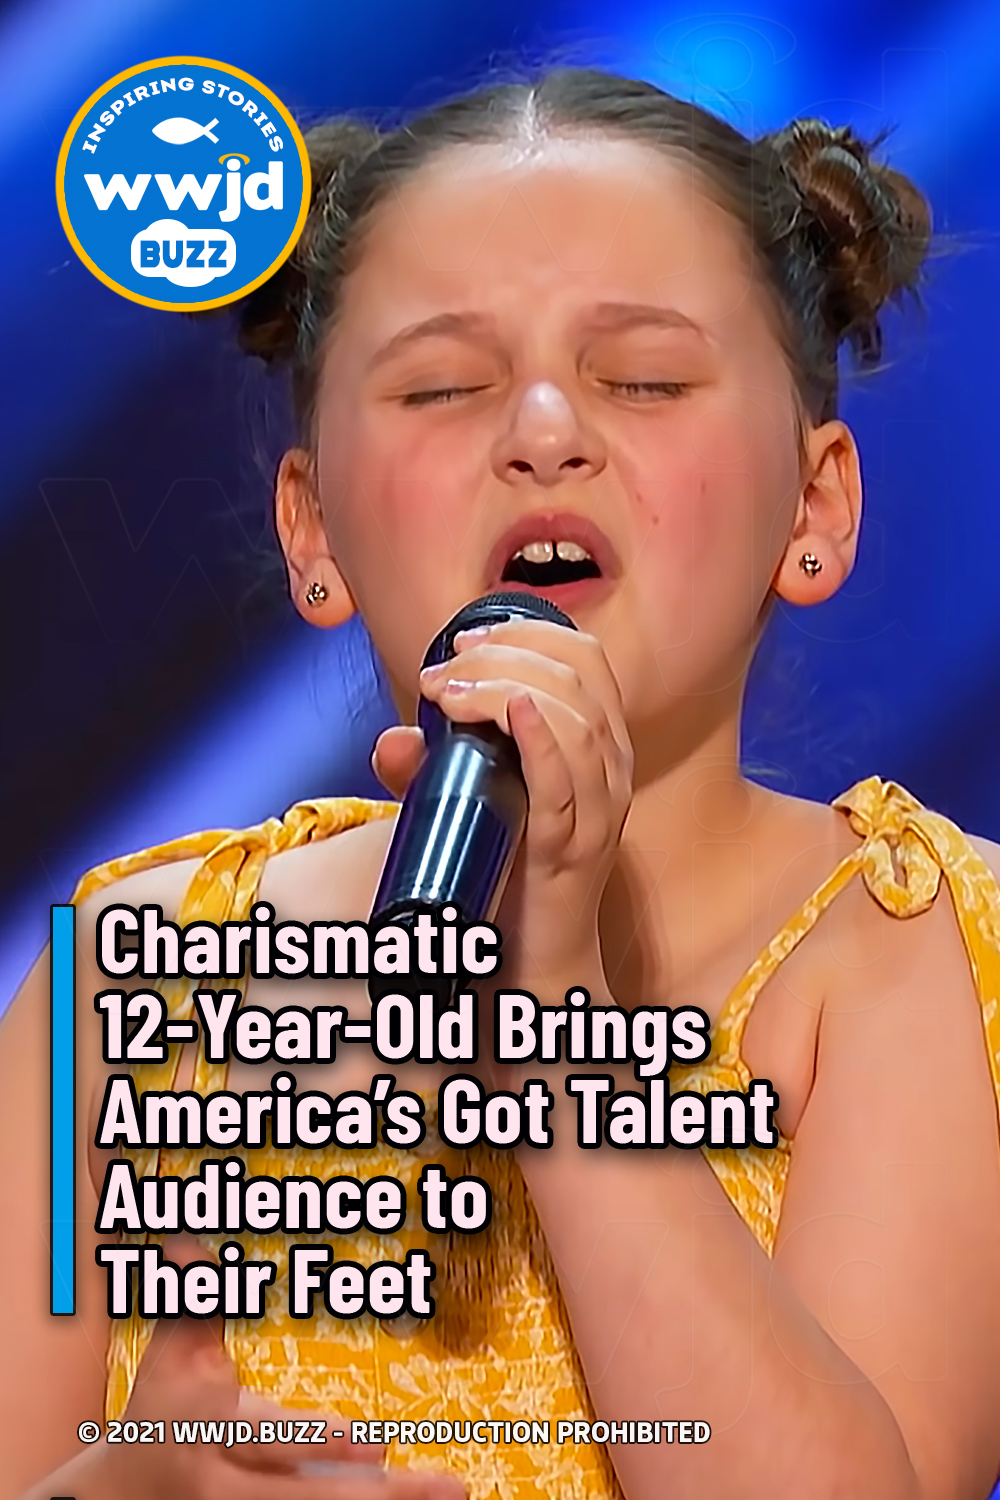 Charismatic 12-Year-Old Brings America’s Got Talent Audience to Their Feet